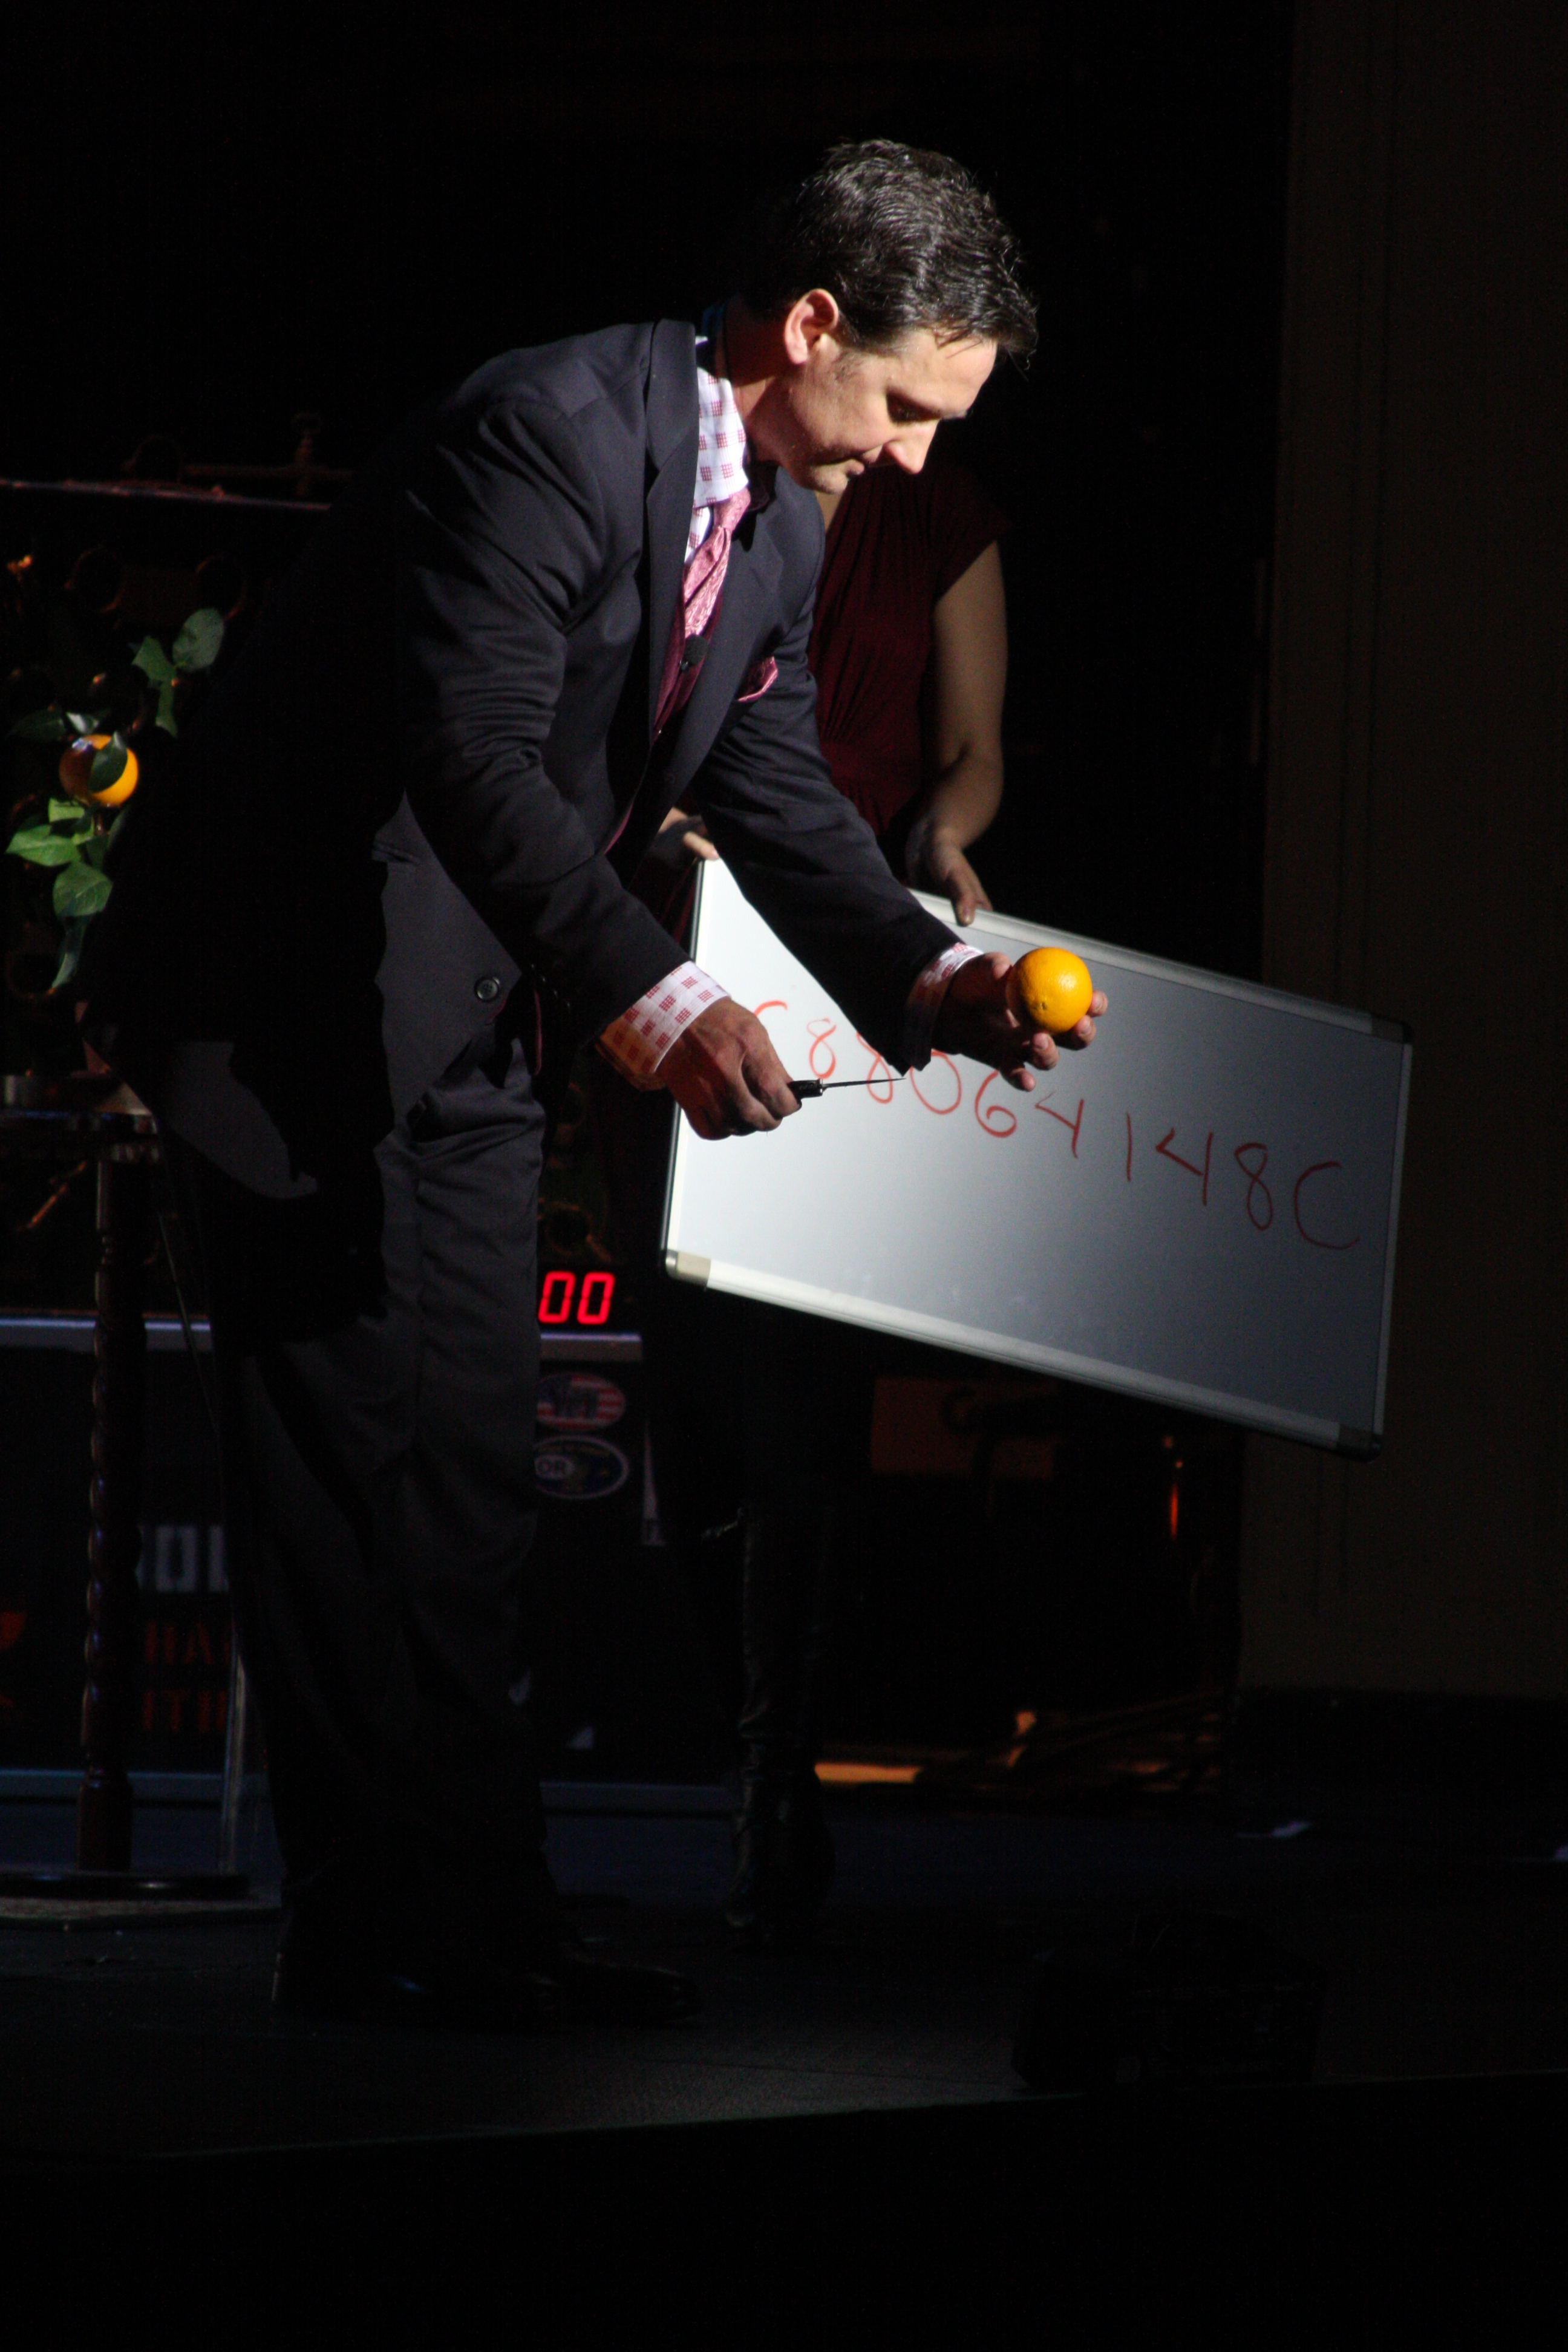 Magicially transforming a borrowed dollar bill from a spectator's pocket inside of an orange. On stage performing at the 2011 Salute To Magic in New York City.